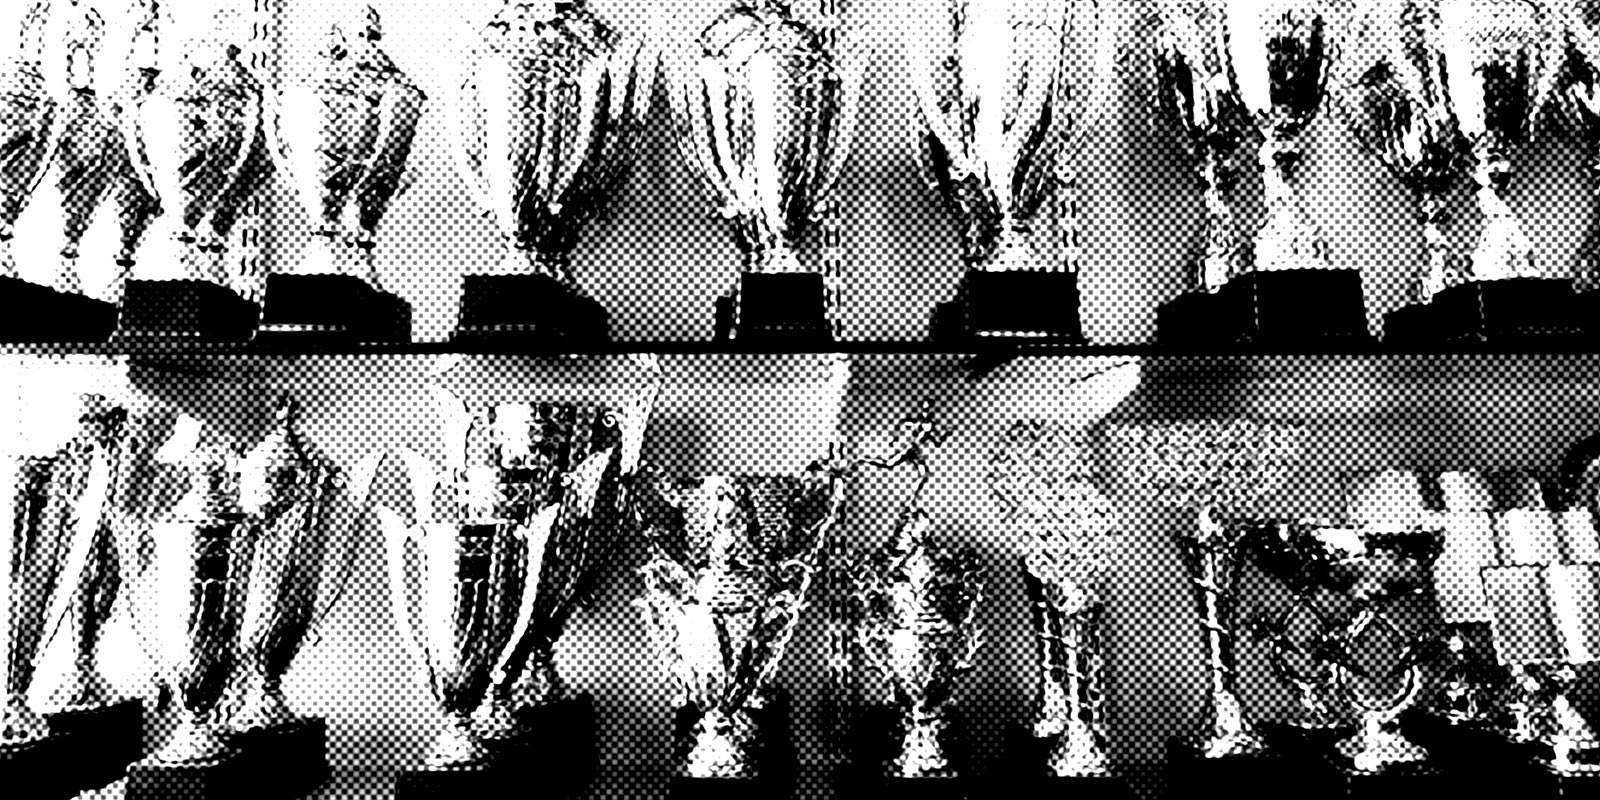 Black and white image of 2 shelves filled with trophies. The image has had a photocopy style effect applied.